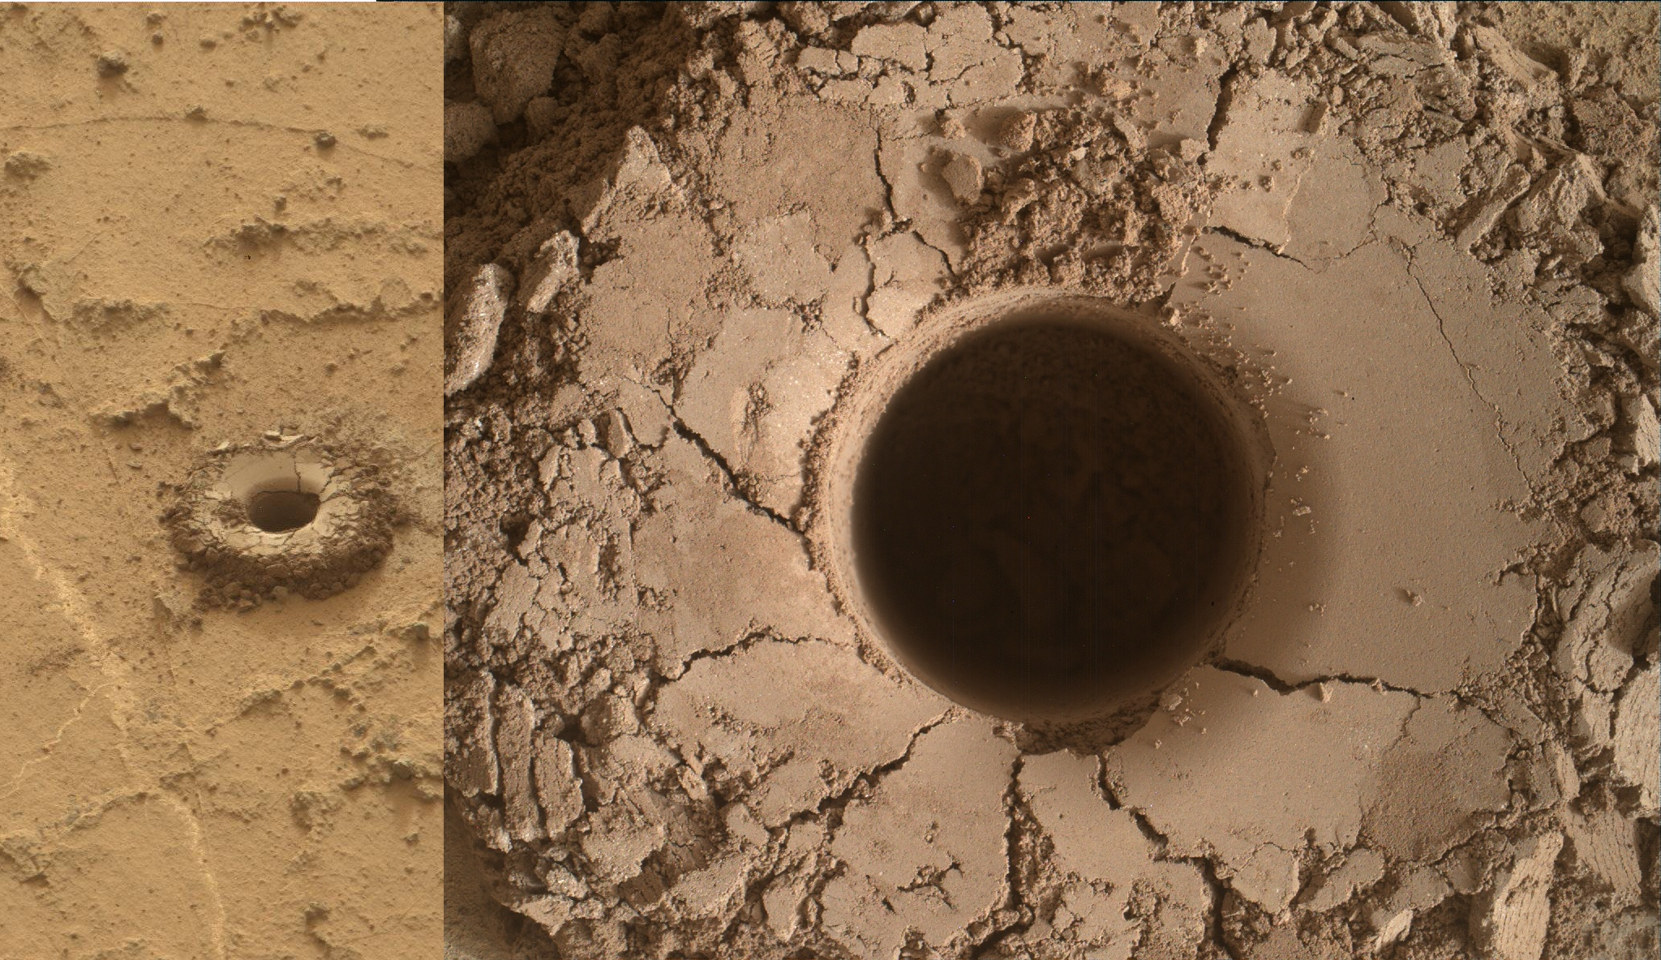 Quela drill hole bored by Curiosity rover on Sol 1464, Sept. 18, 2016 as seen in this collage of Mastcam and MAHLI raw color images taken on Sol 1465. Image Credit: NASA/JPL/MSSS. Collage: Marco Di Lorenzo/Ken Kremer 